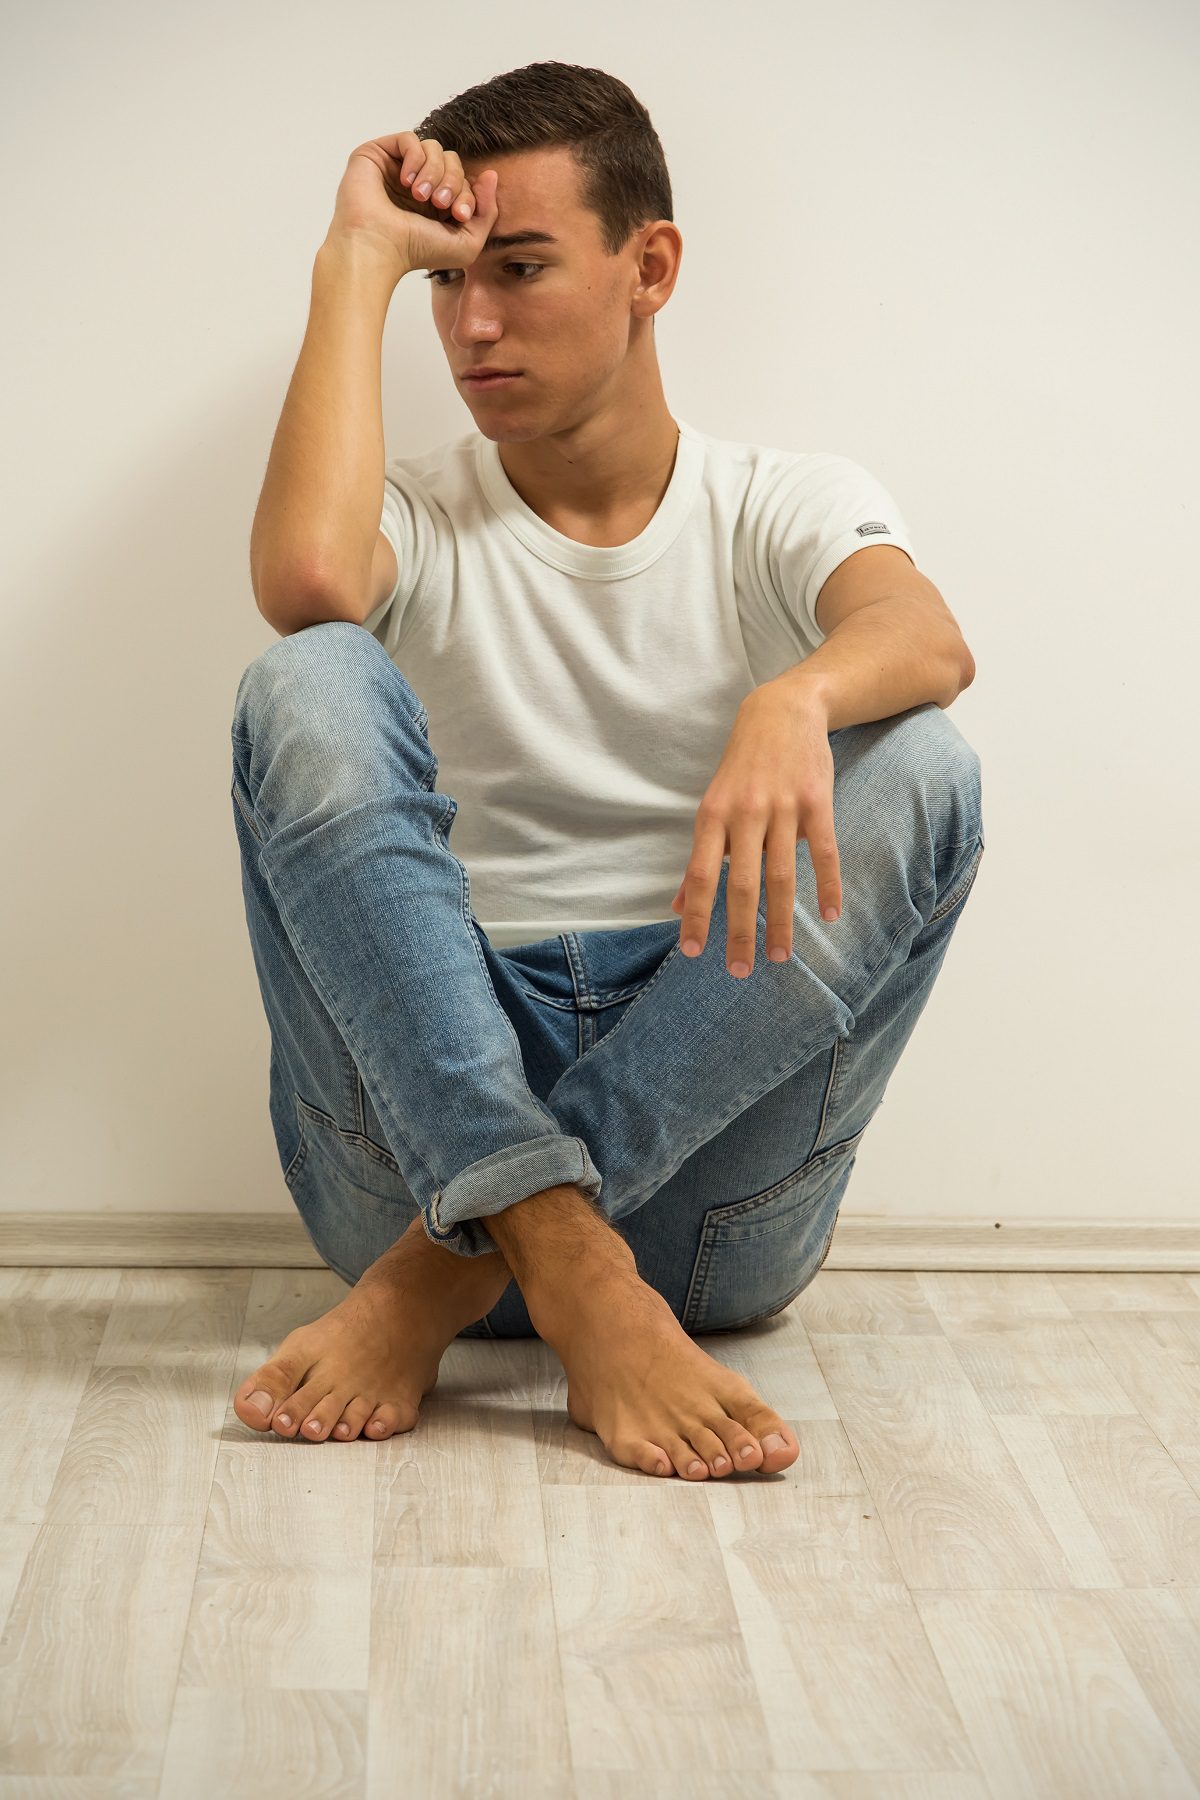 Young man sitting on a floor with hands on head.